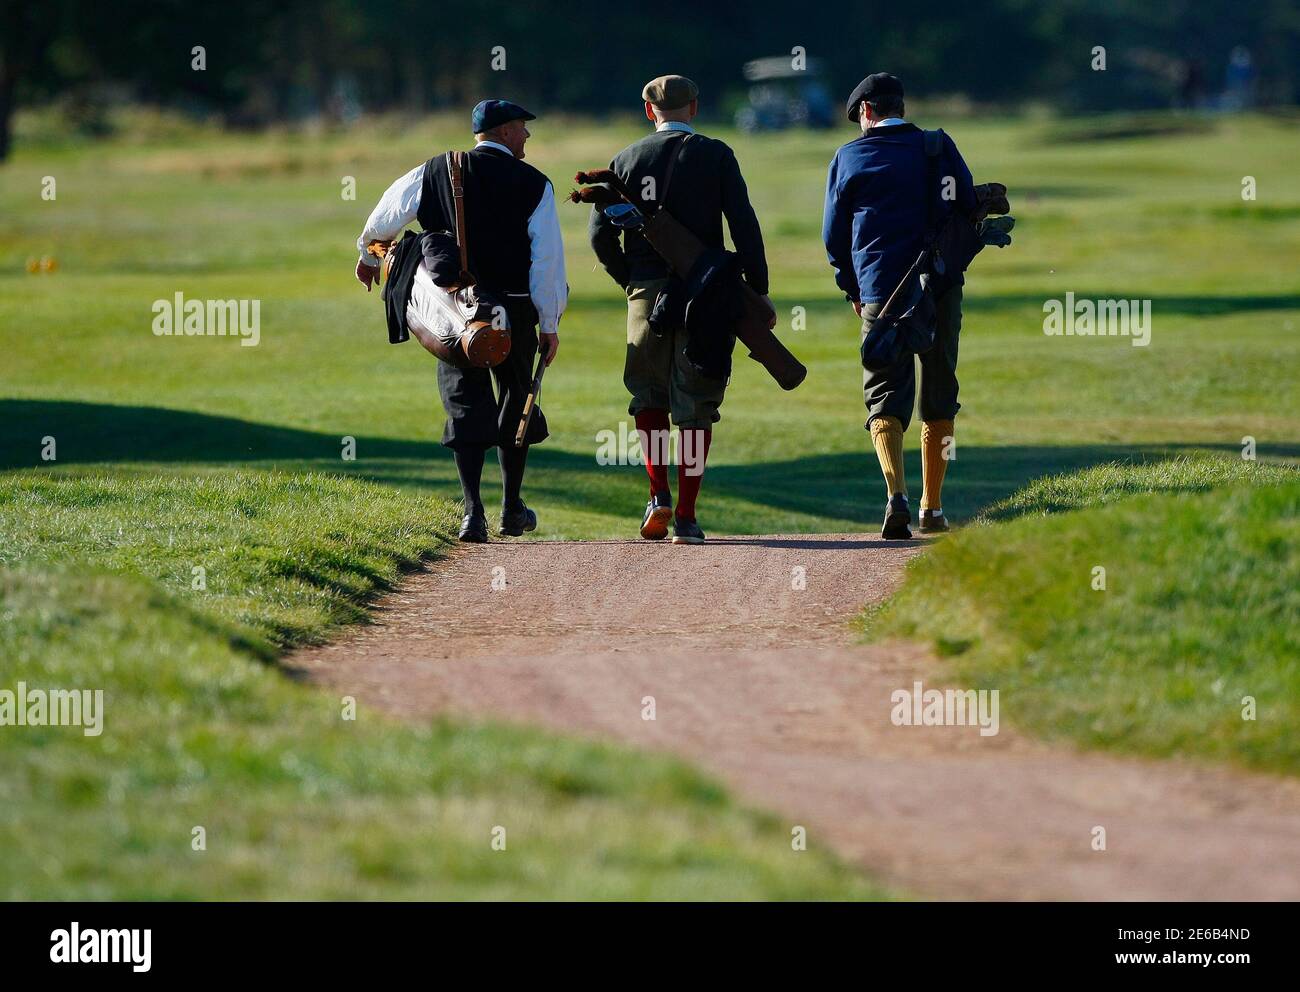 Competitors taking part in the World Hickory Open Golf Championship walk  together during the first round at Monifeith Links golf course in  Monifeith, east Scotland October 8, 2012. The tournament, now in